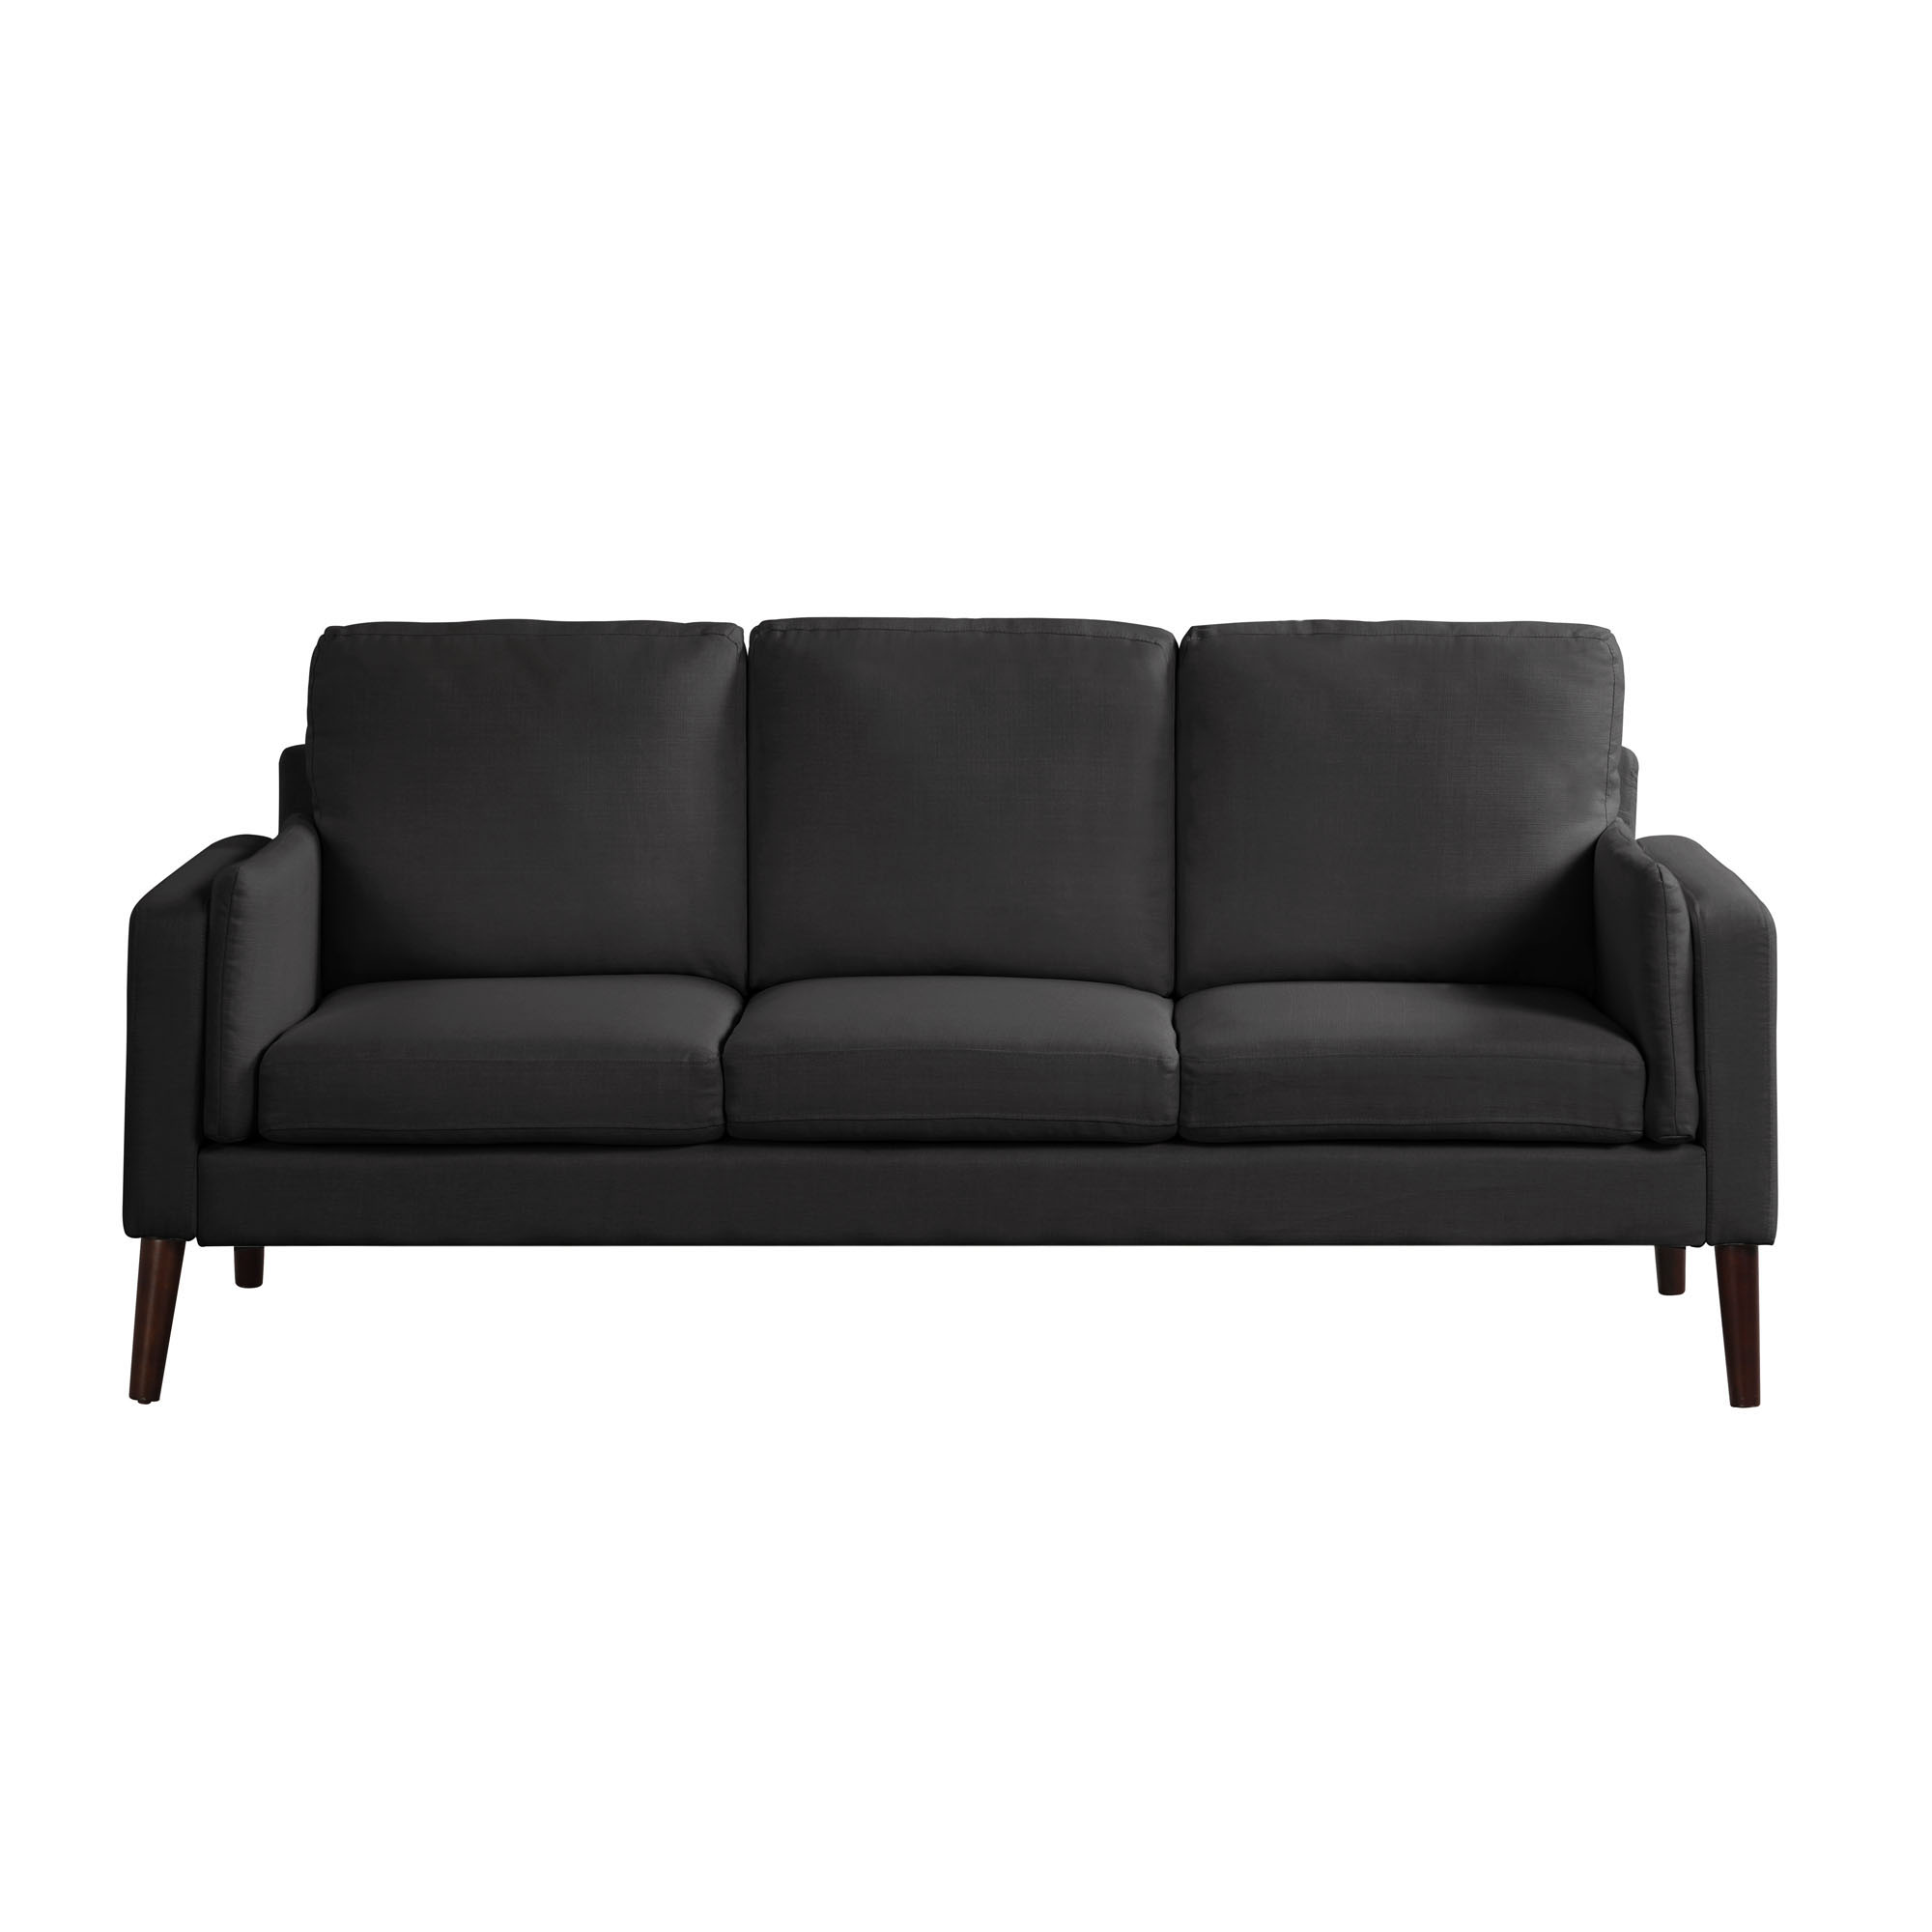 Elm & Oak Nathaniel Modern Sofa with Side Pocket and USB Power, Black Fabric Upholstery - image 3 of 10